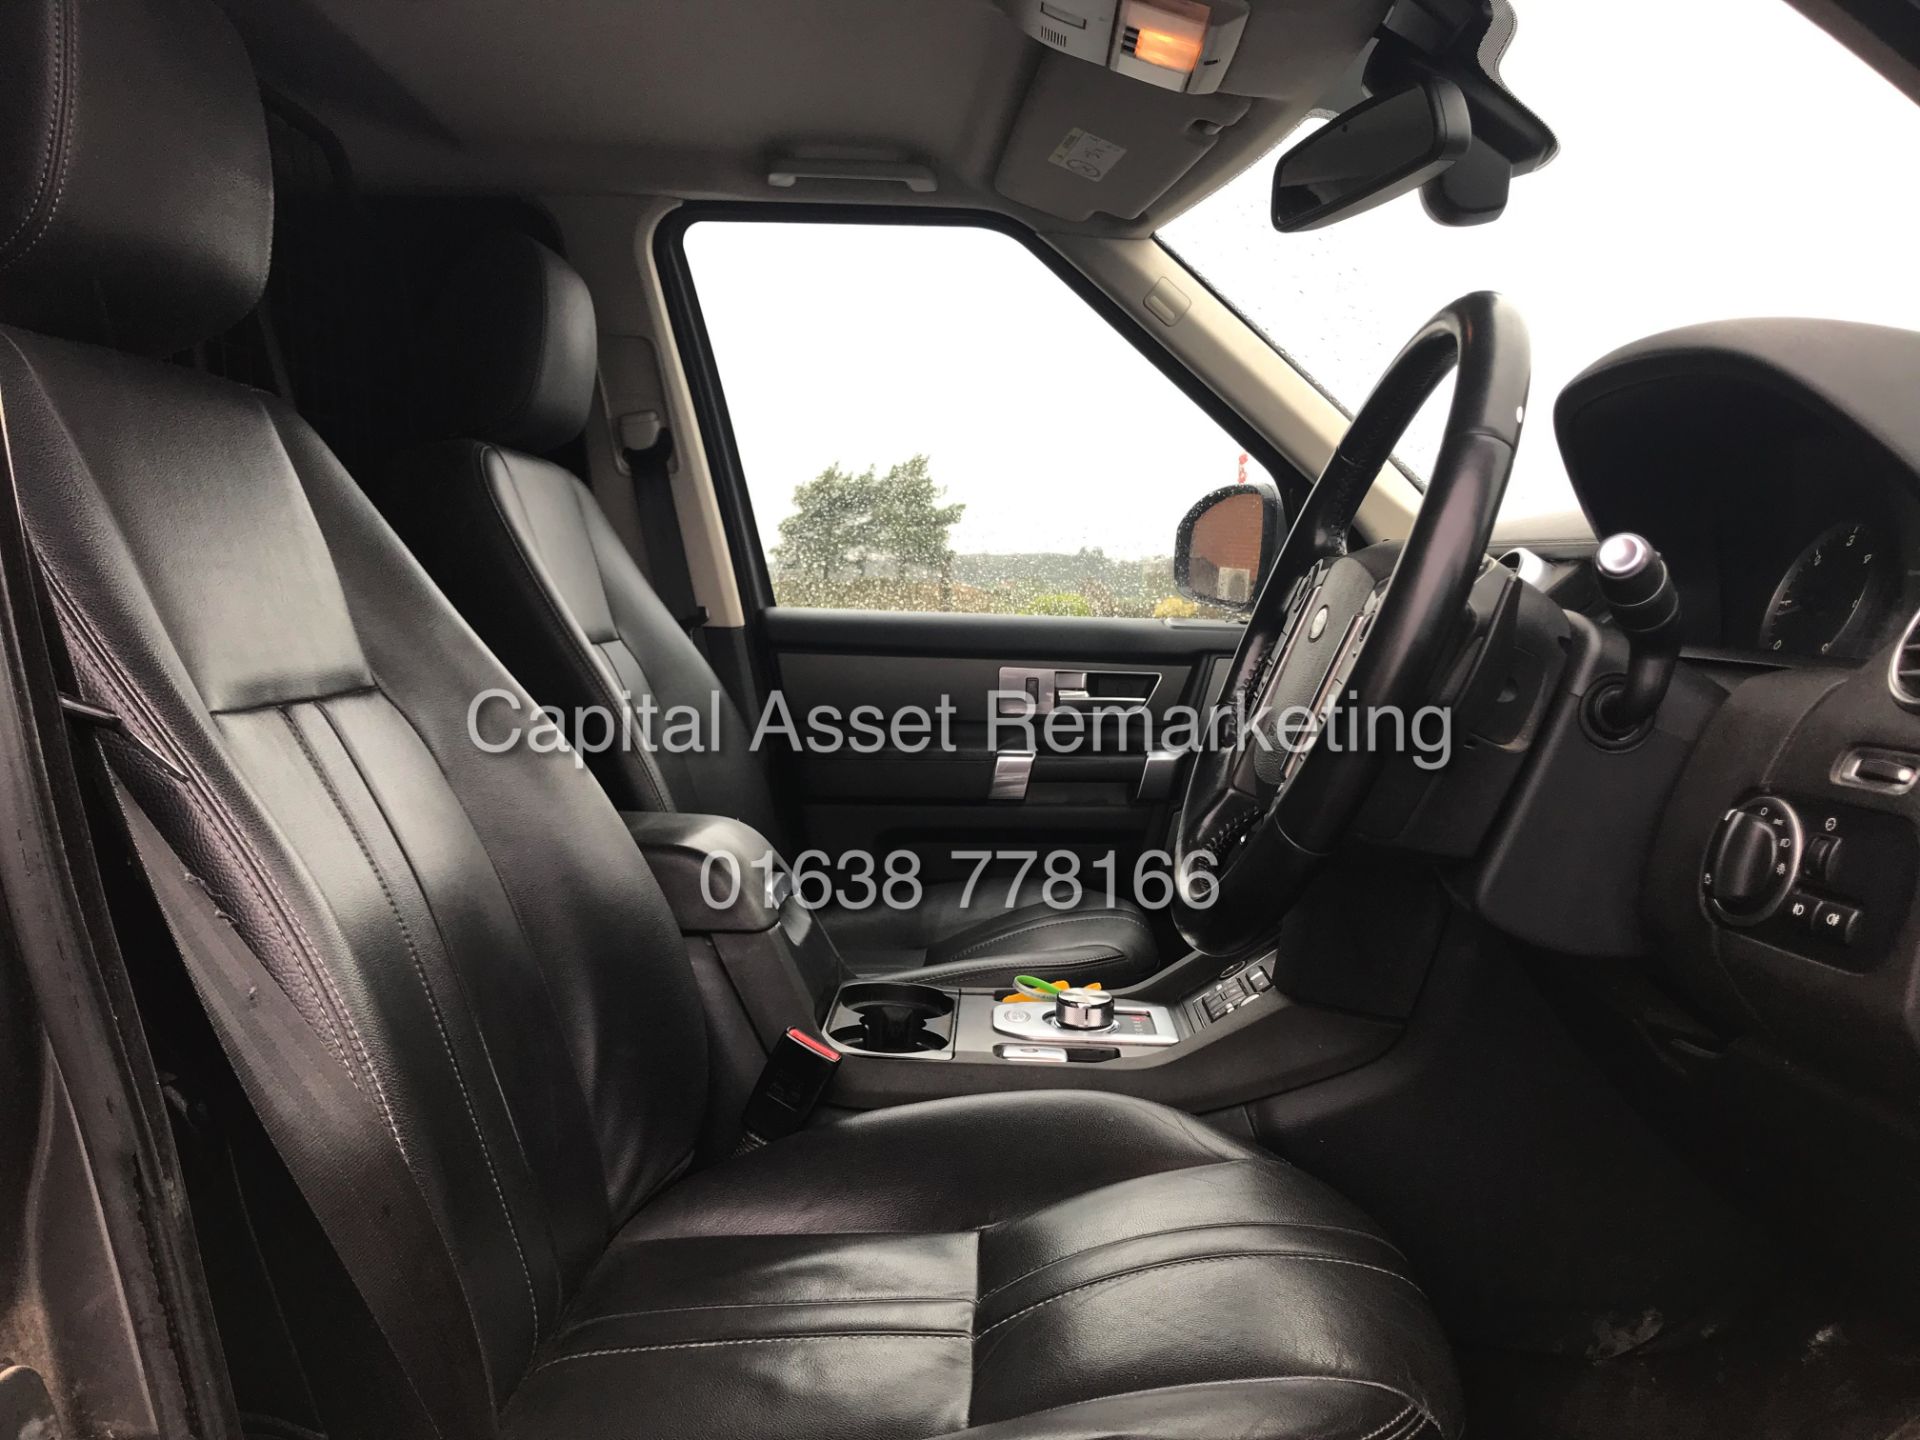 LANDROVER DISCOVERY 4 "SE" AUTO 3.0SDV6 - (2016 REG) 1 KEEPER - SAT NAV - LEATHER - HUGE SPEC -WOW! - Image 9 of 20